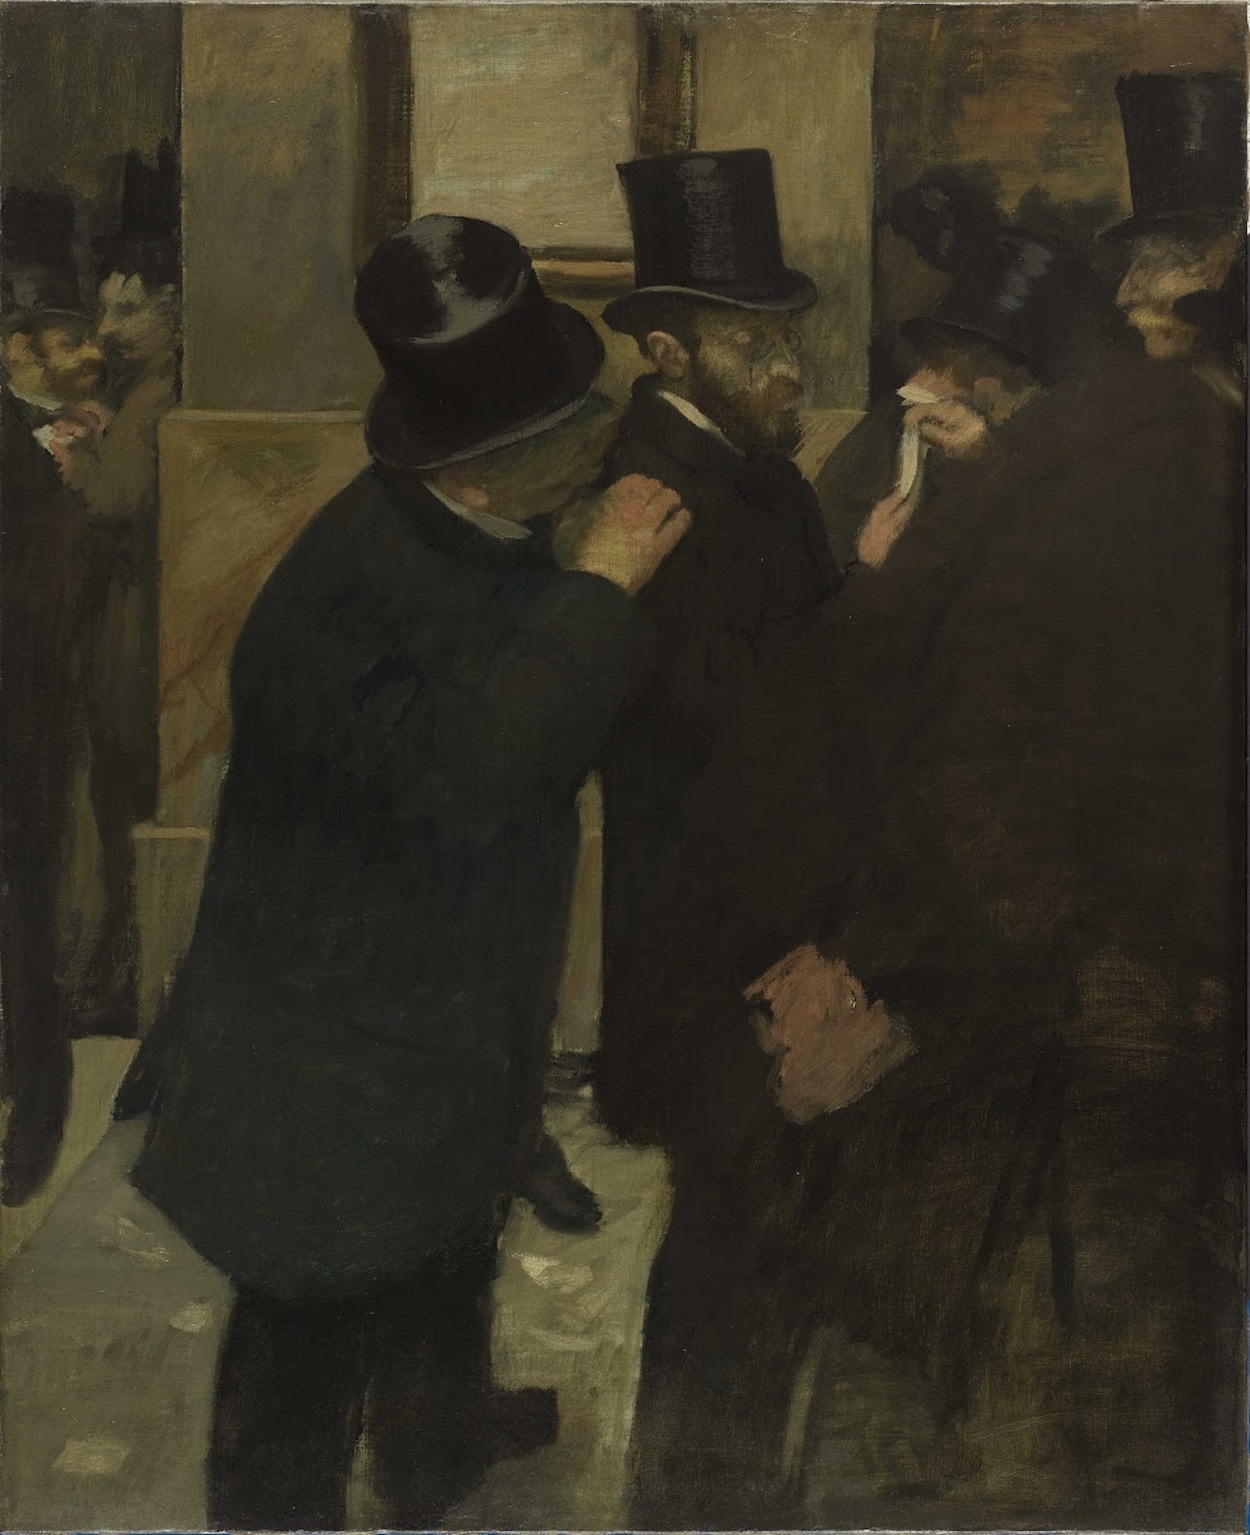 Portraits at the Stock Exchange by Edgar Degas - 1879 - 100 x 82 cm Musée d'Orsay